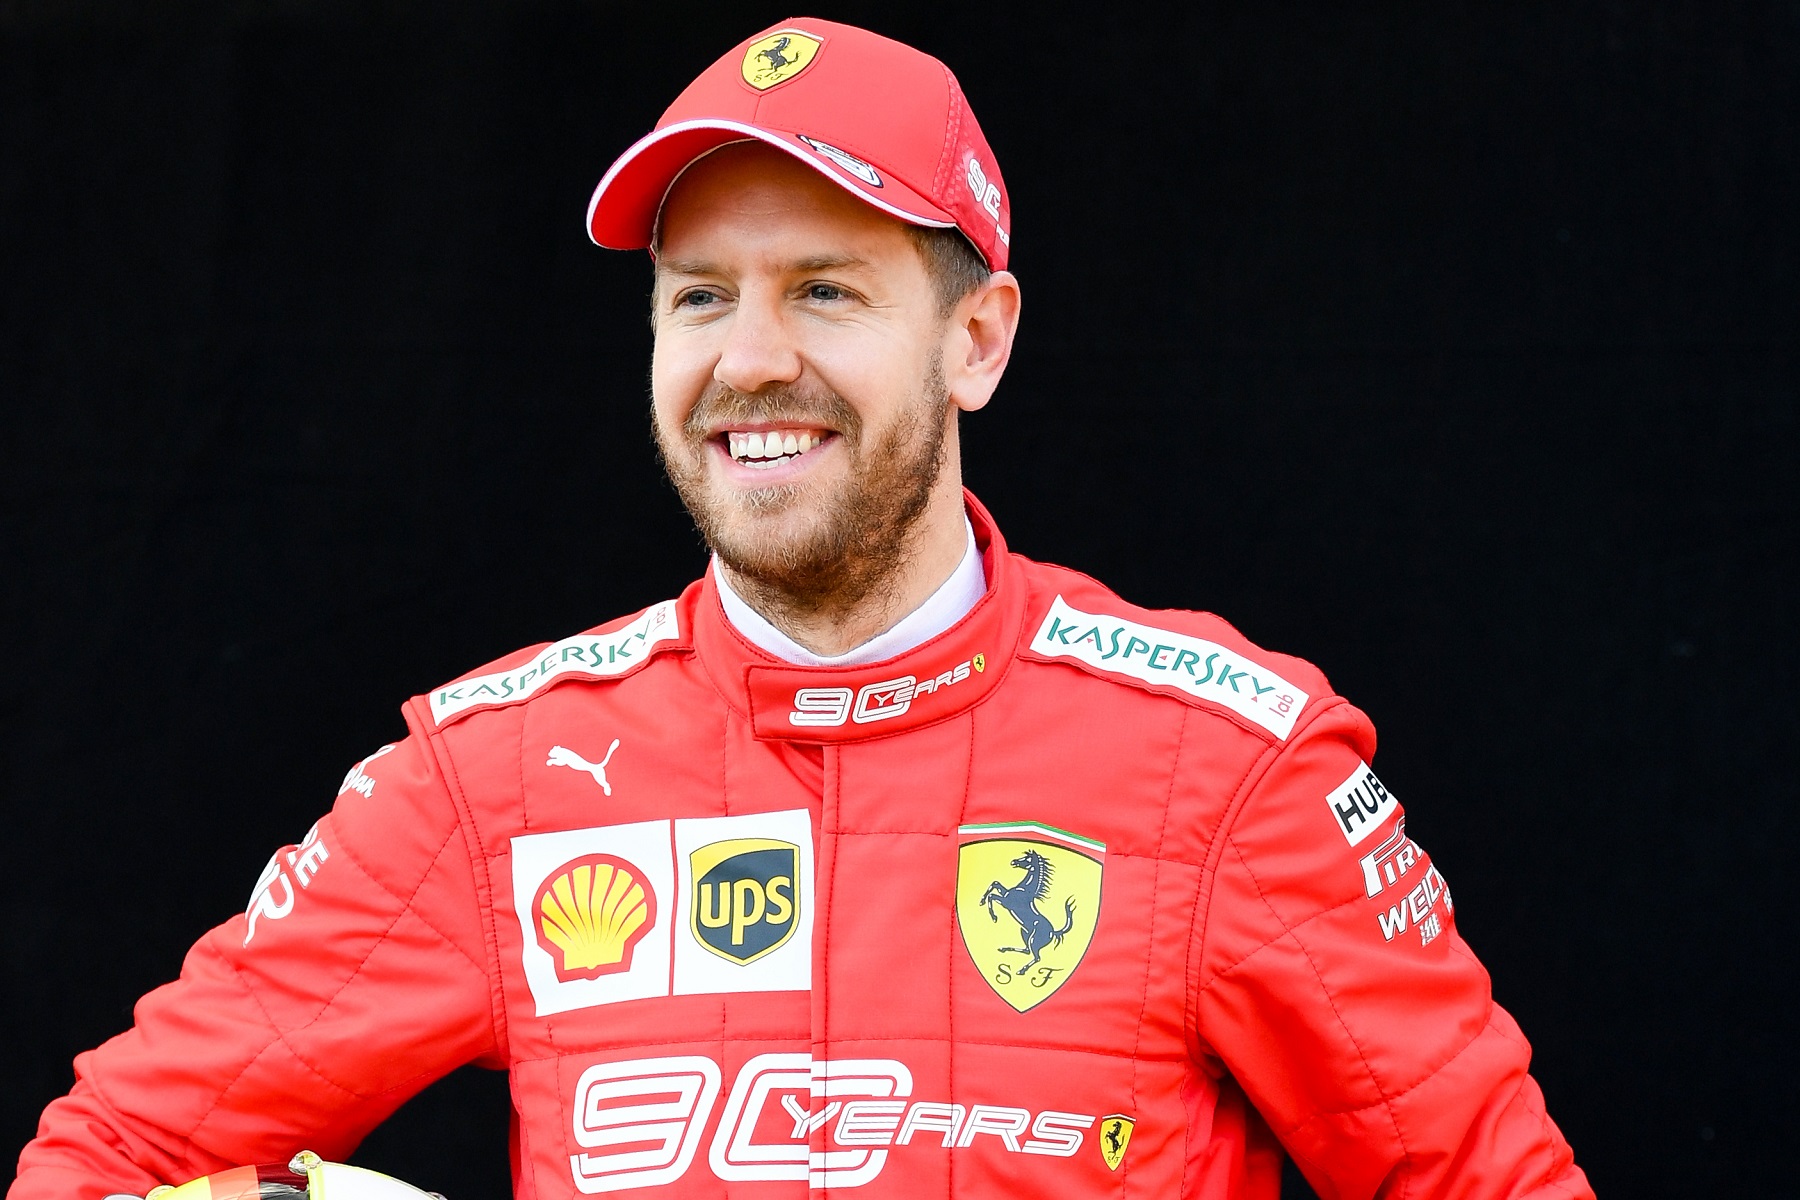 Sebastian Vettel Would Be 1 of the Best Formula One Drivers Ever if not for Lewis Hamilton